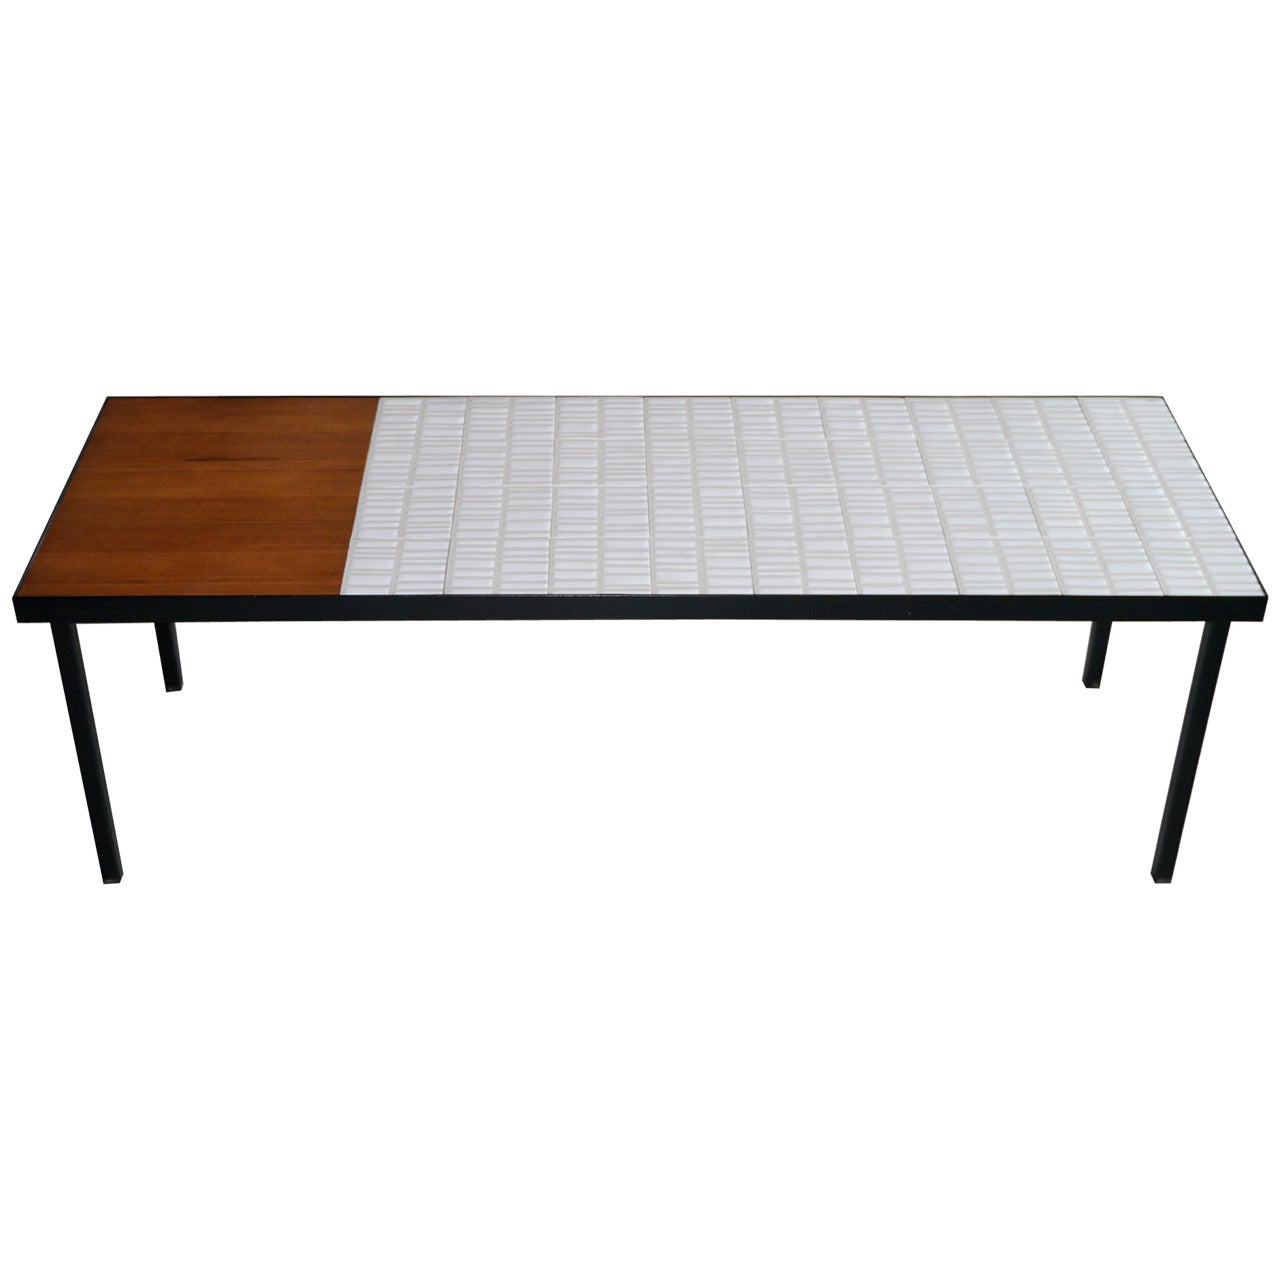 Iconic Low Table by Roger Capron, circa 1950